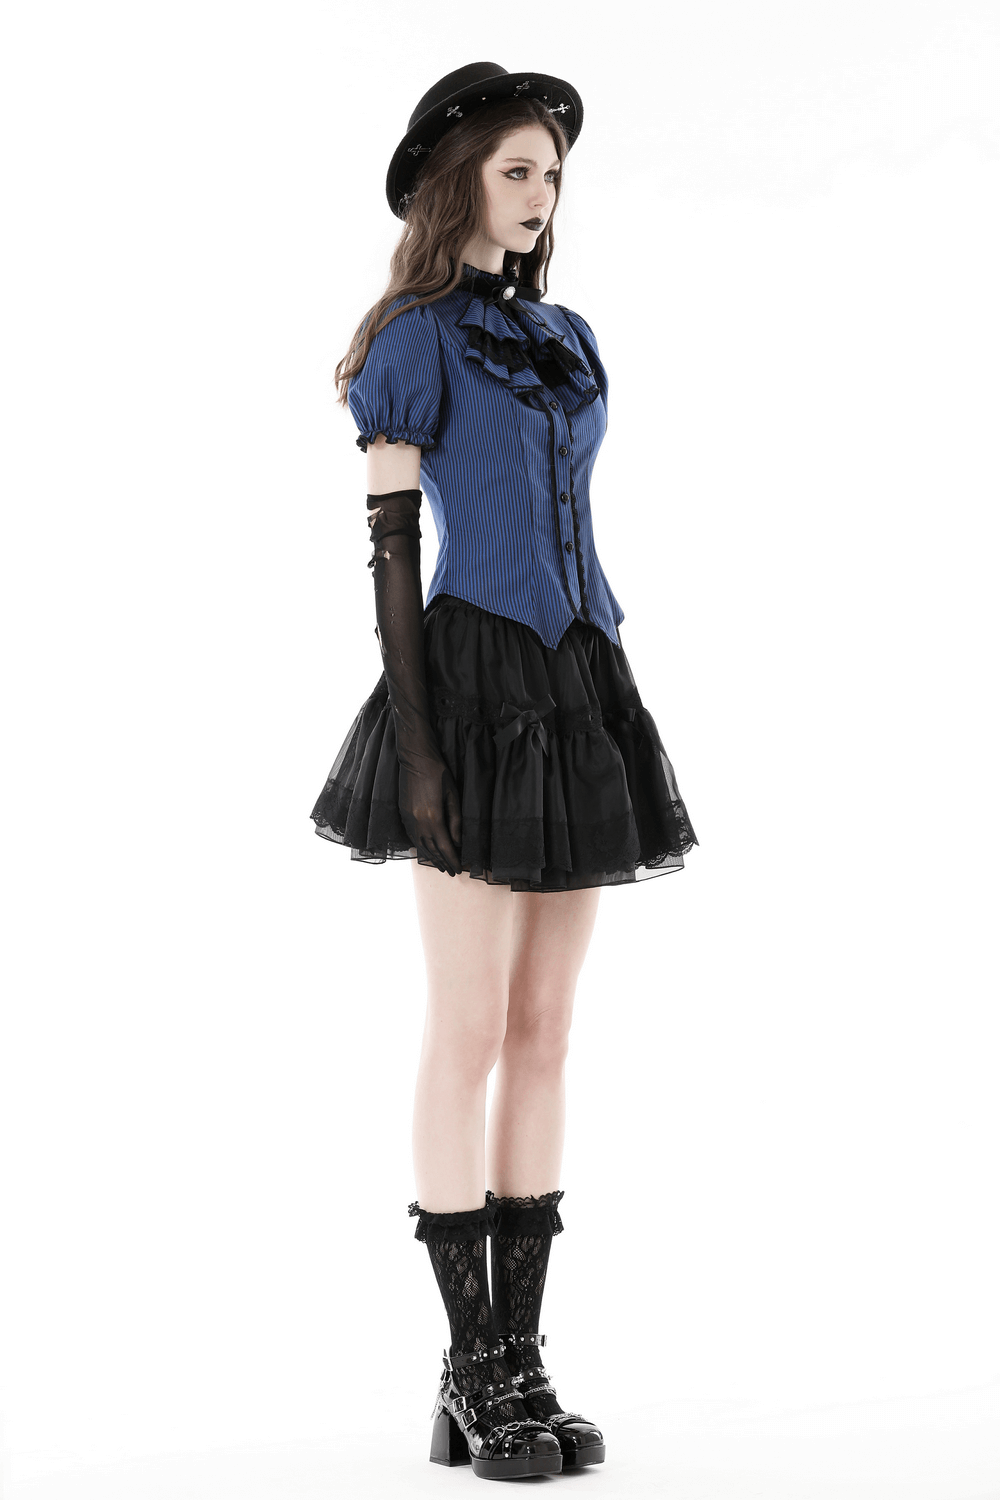 Dark Gothic Frilly Collar Striped Blouse With Black Lace Trim